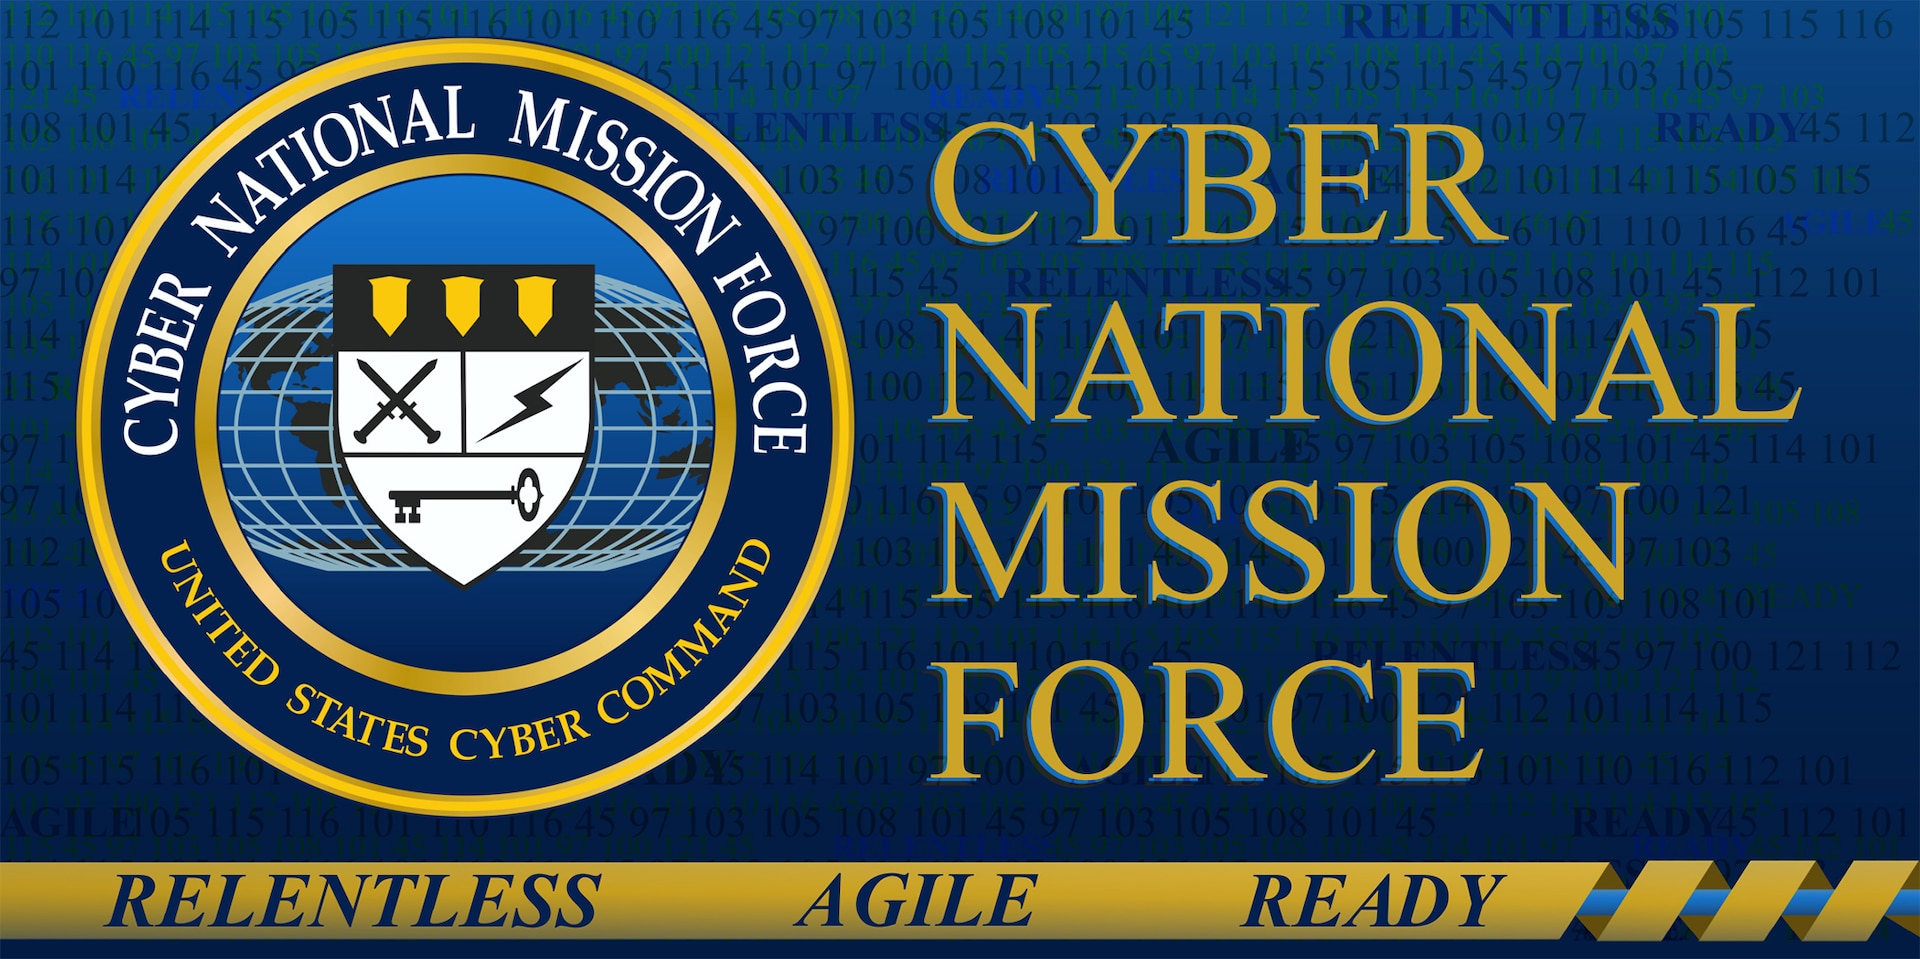 The Cyber National Mission Force seal